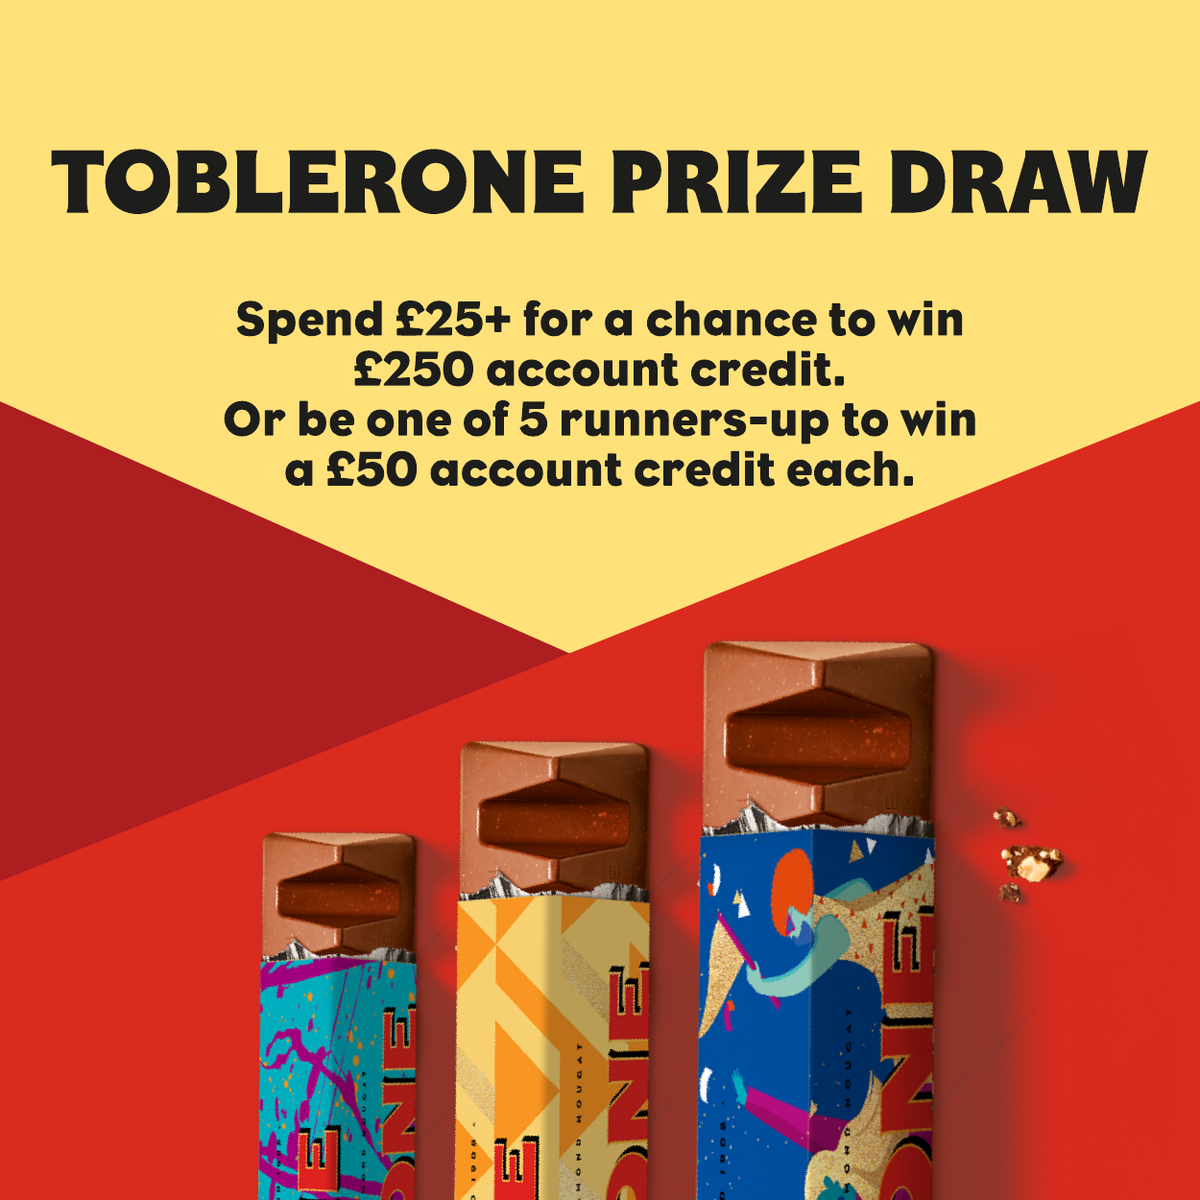 Spend £25+ for a chance to win £250 account credit.  Or be one of 5 runners-up to win  a £50 account credit each.